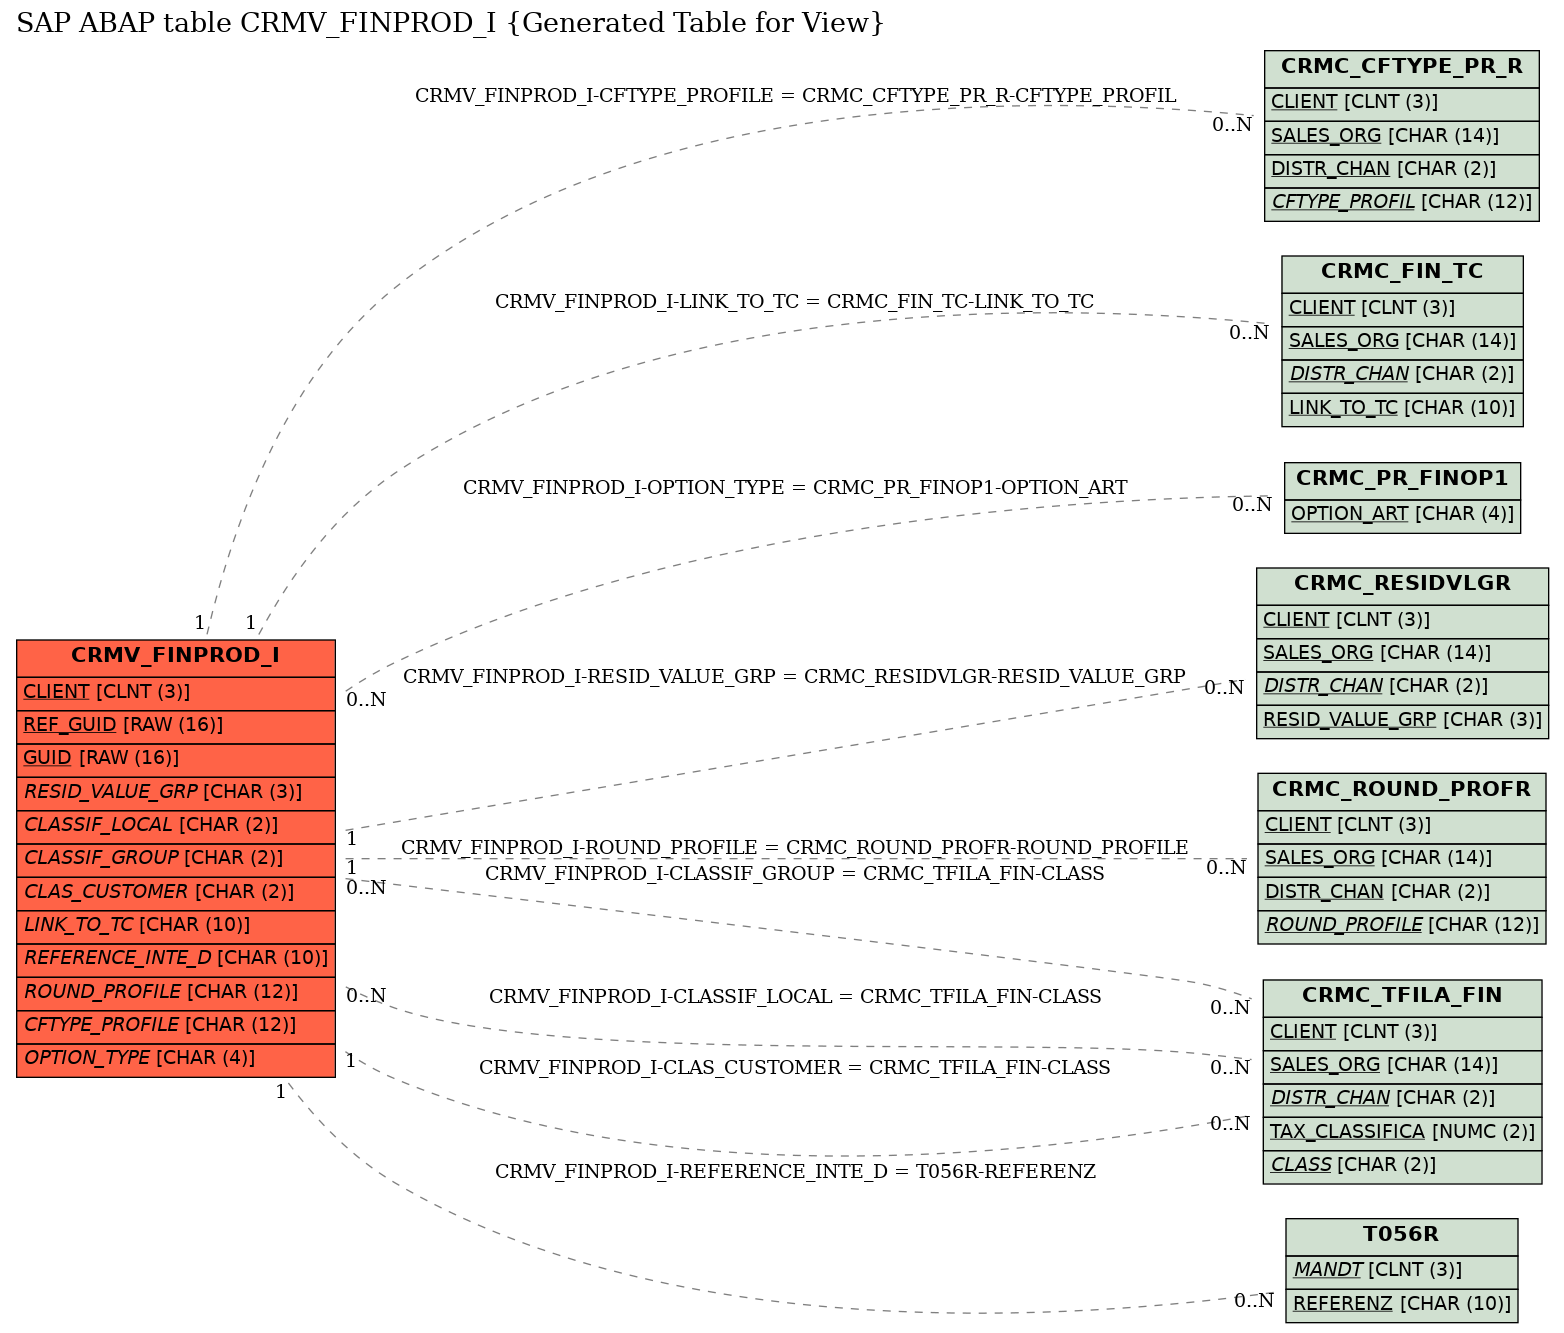 E-R Diagram for table CRMV_FINPROD_I (Generated Table for View)